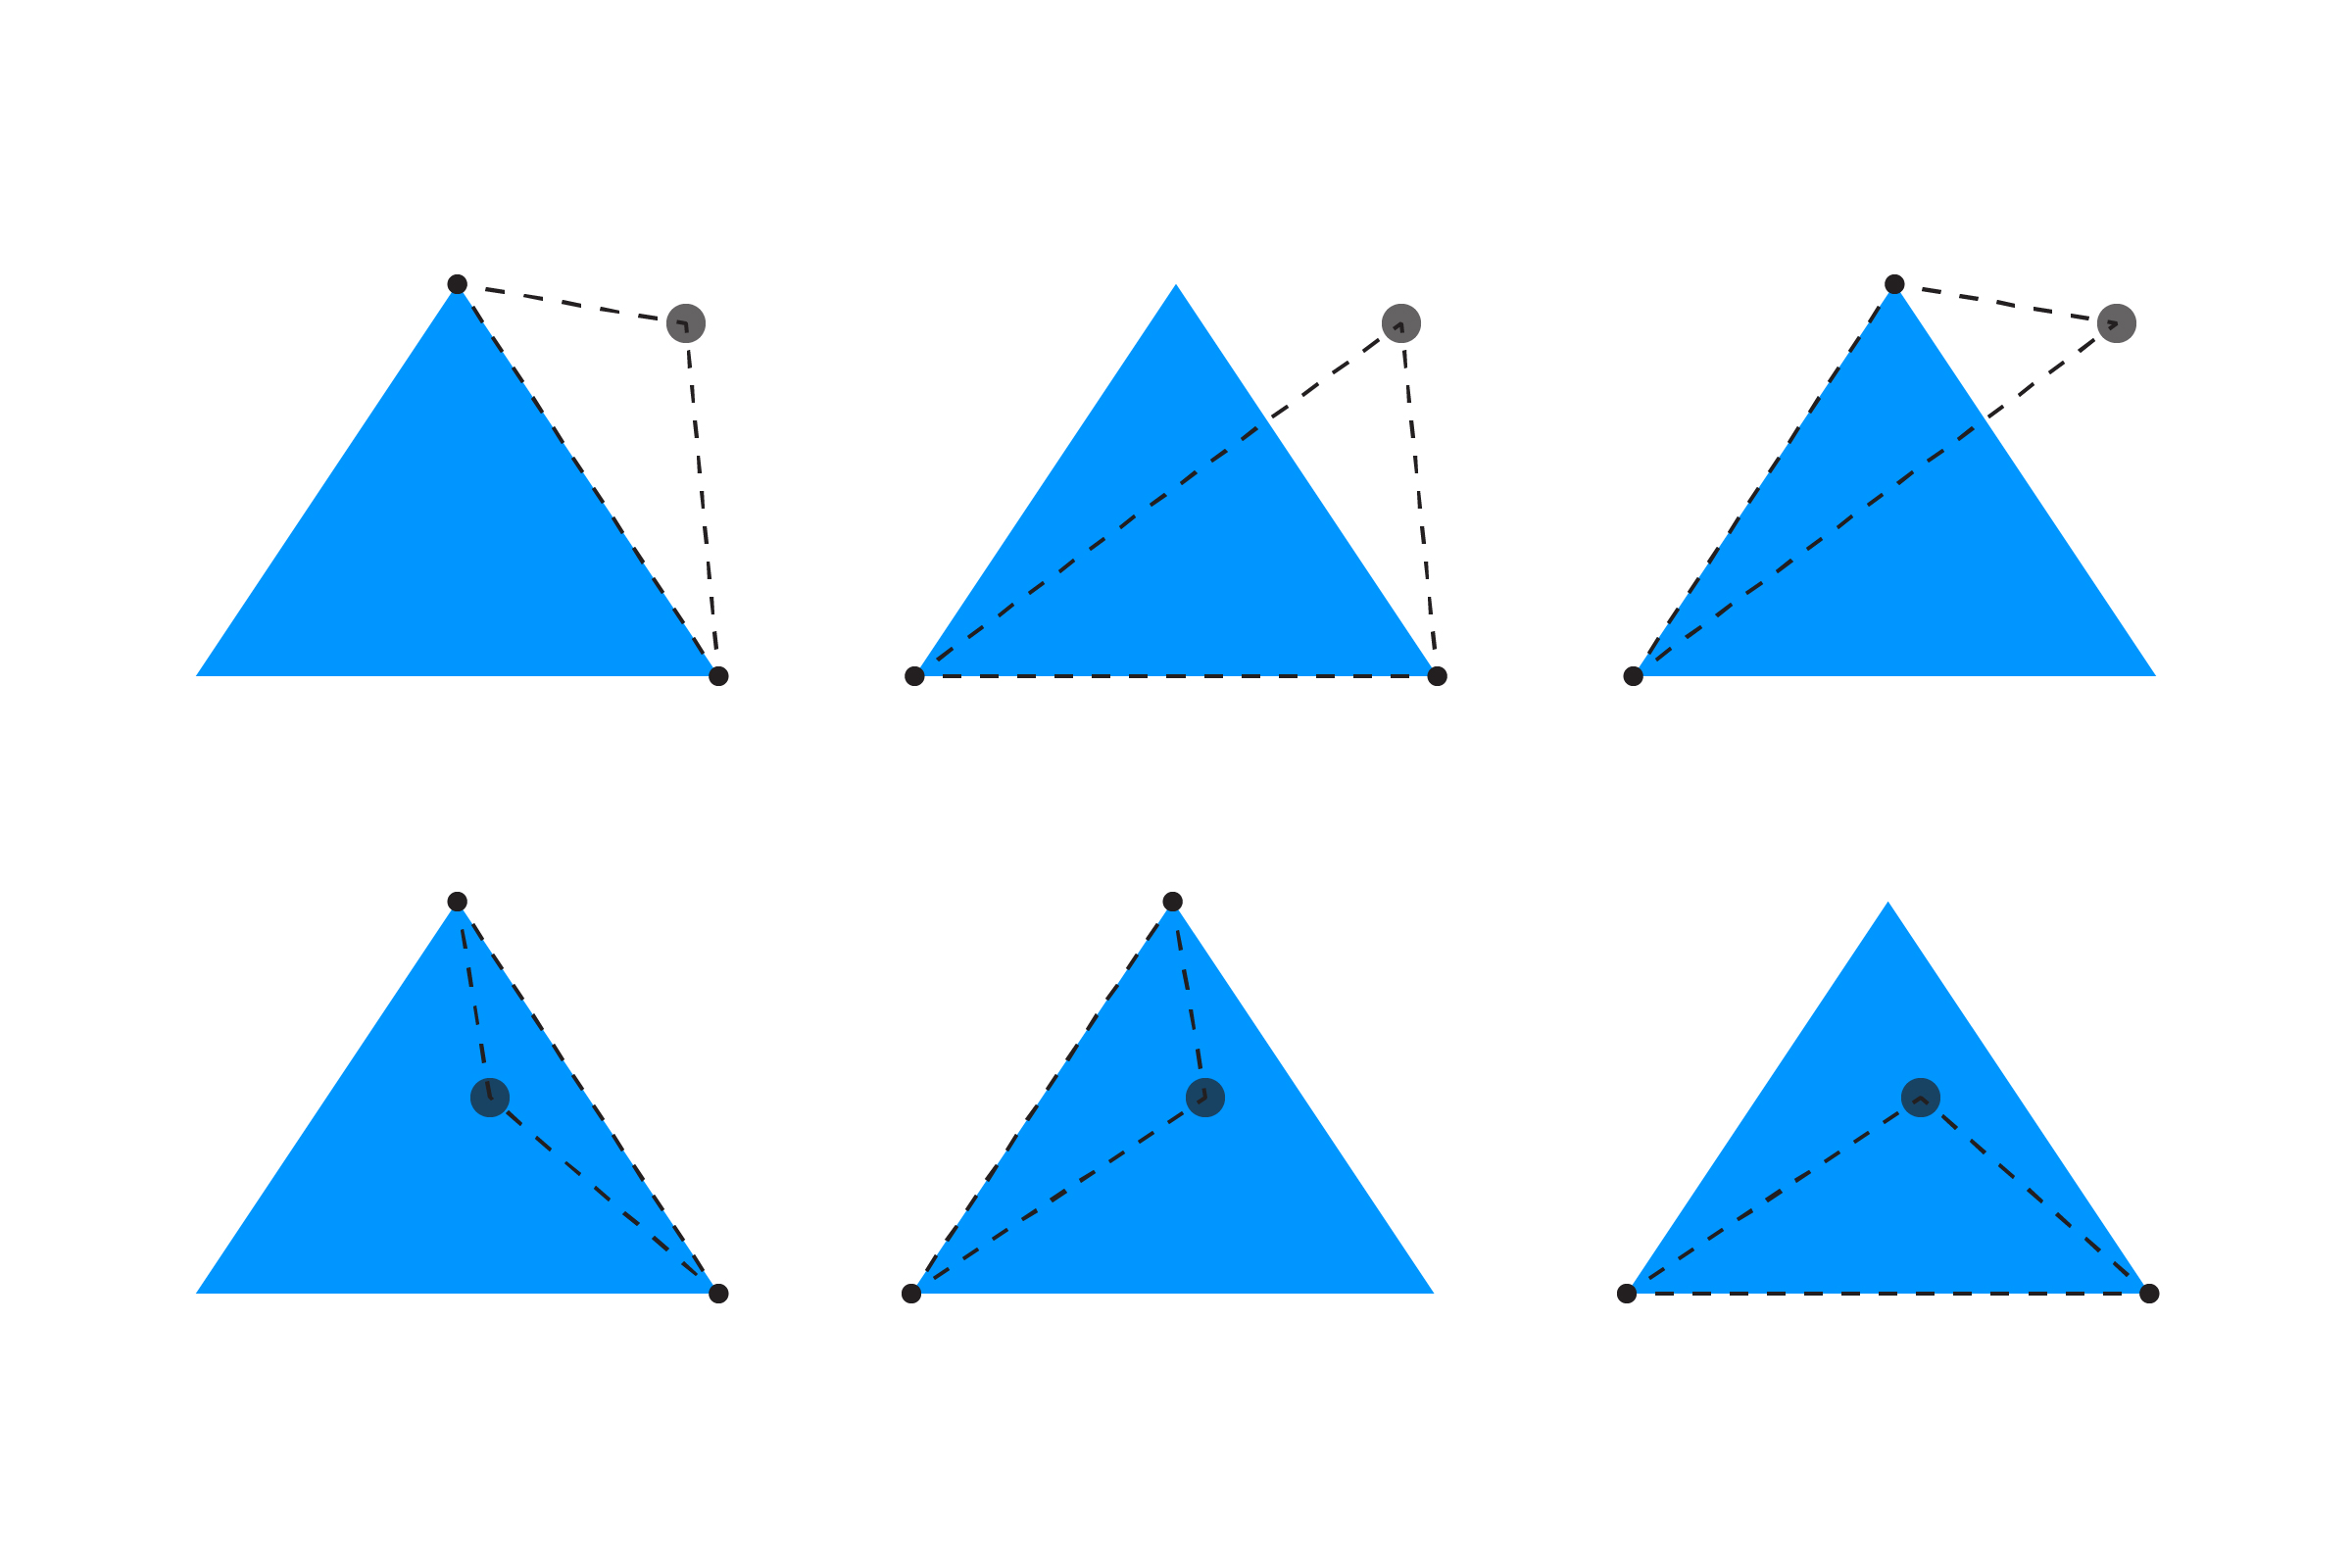 Points outside and inside a triangle, forming three smaller triangles